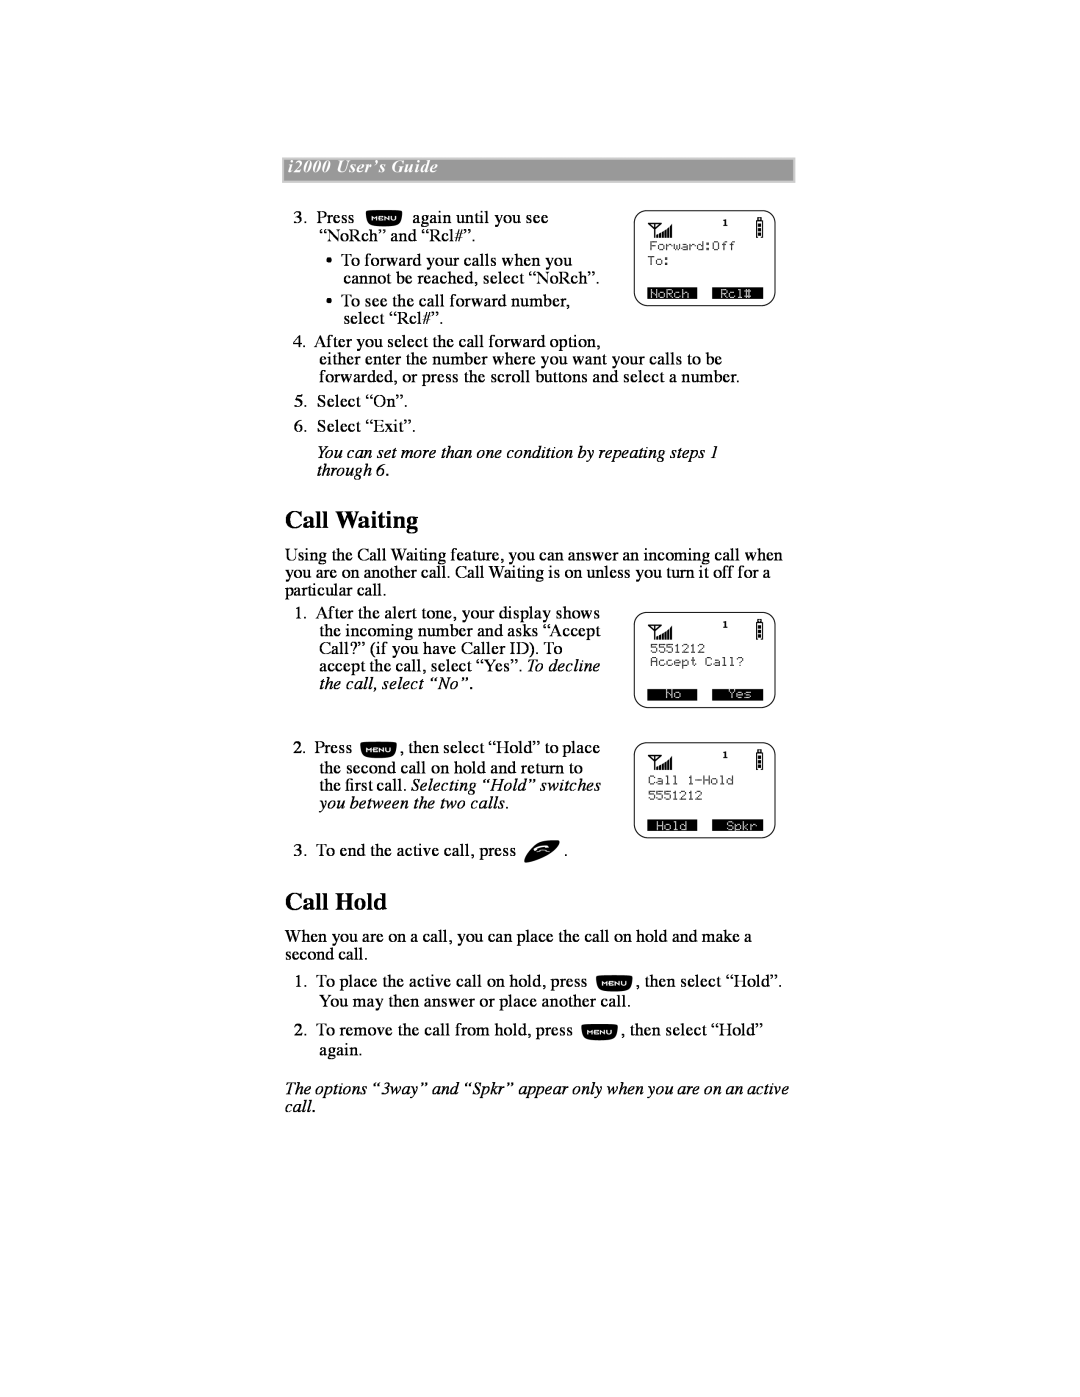 Motorola iDEN manual Call Waiting, Call Hold, You can set more than one condition by repeating steps 1 through 